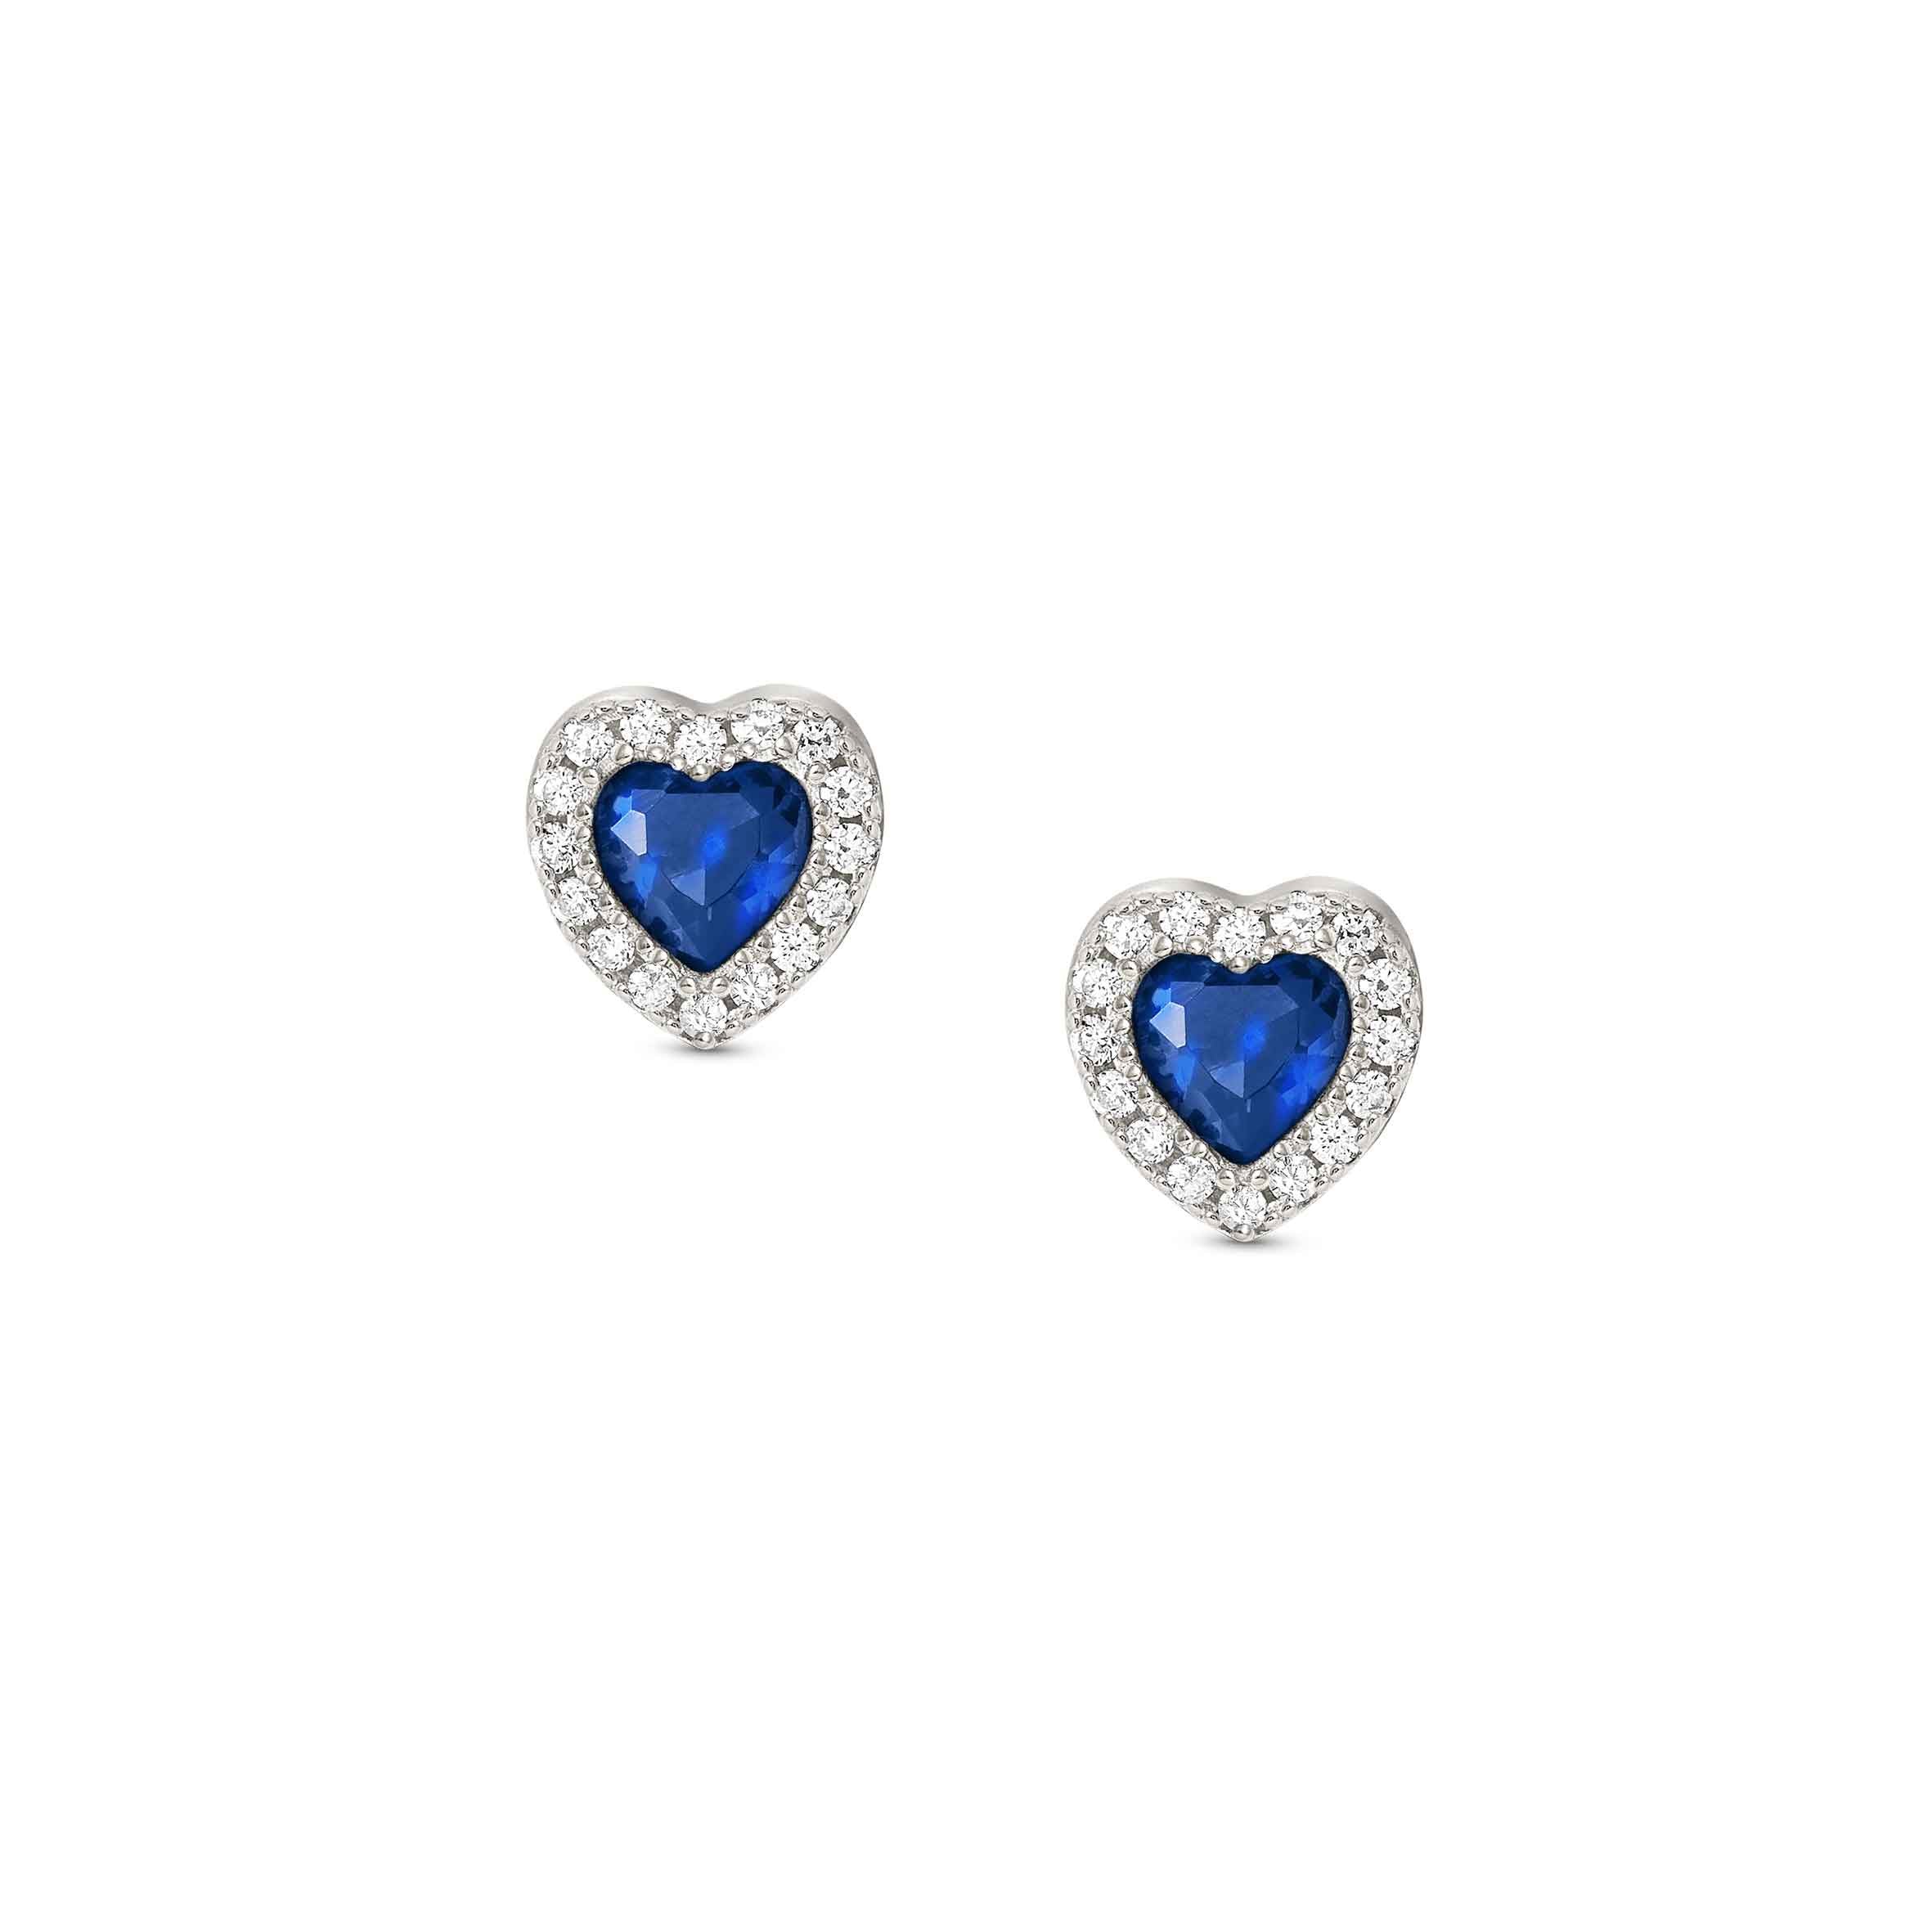 Nomination AllMyLove Blue Earrings